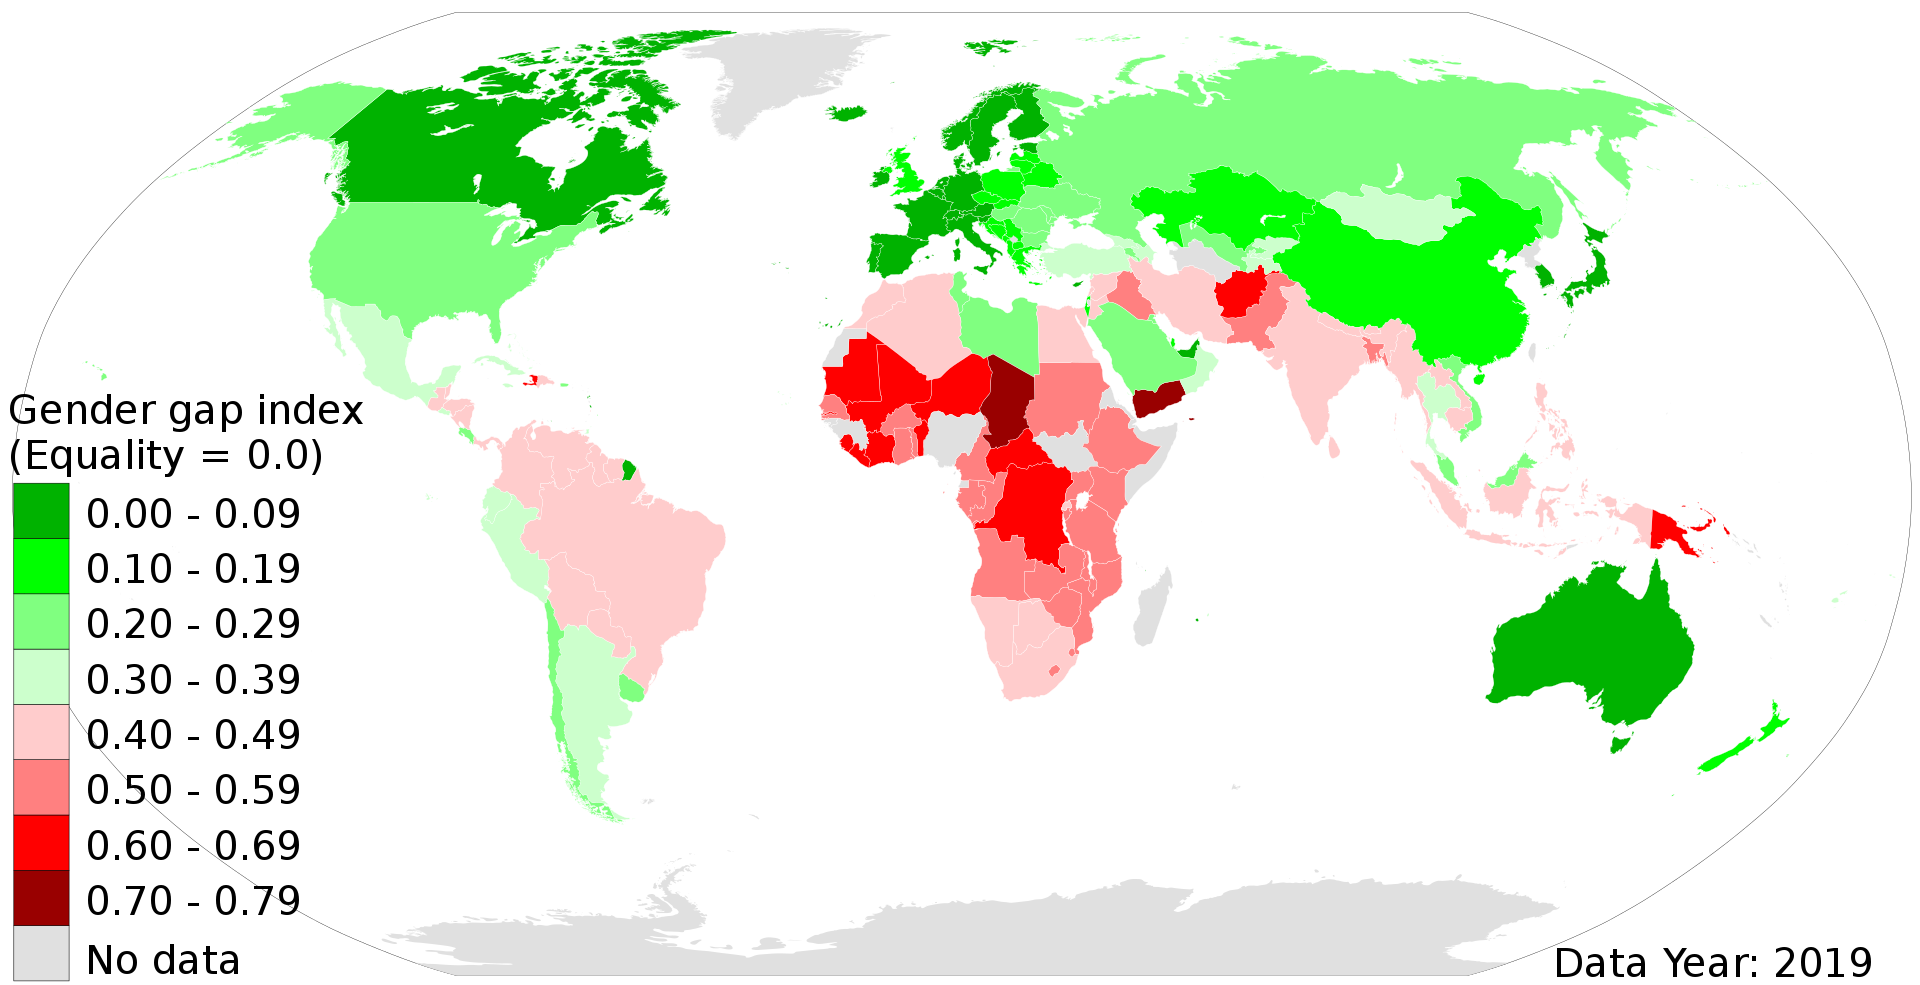 Countries by UN Gender Inequality Index in 2019. Red denotes more gender inequality, and green more equality. Ⓒ Asus2004, CC BY-SA 4.0